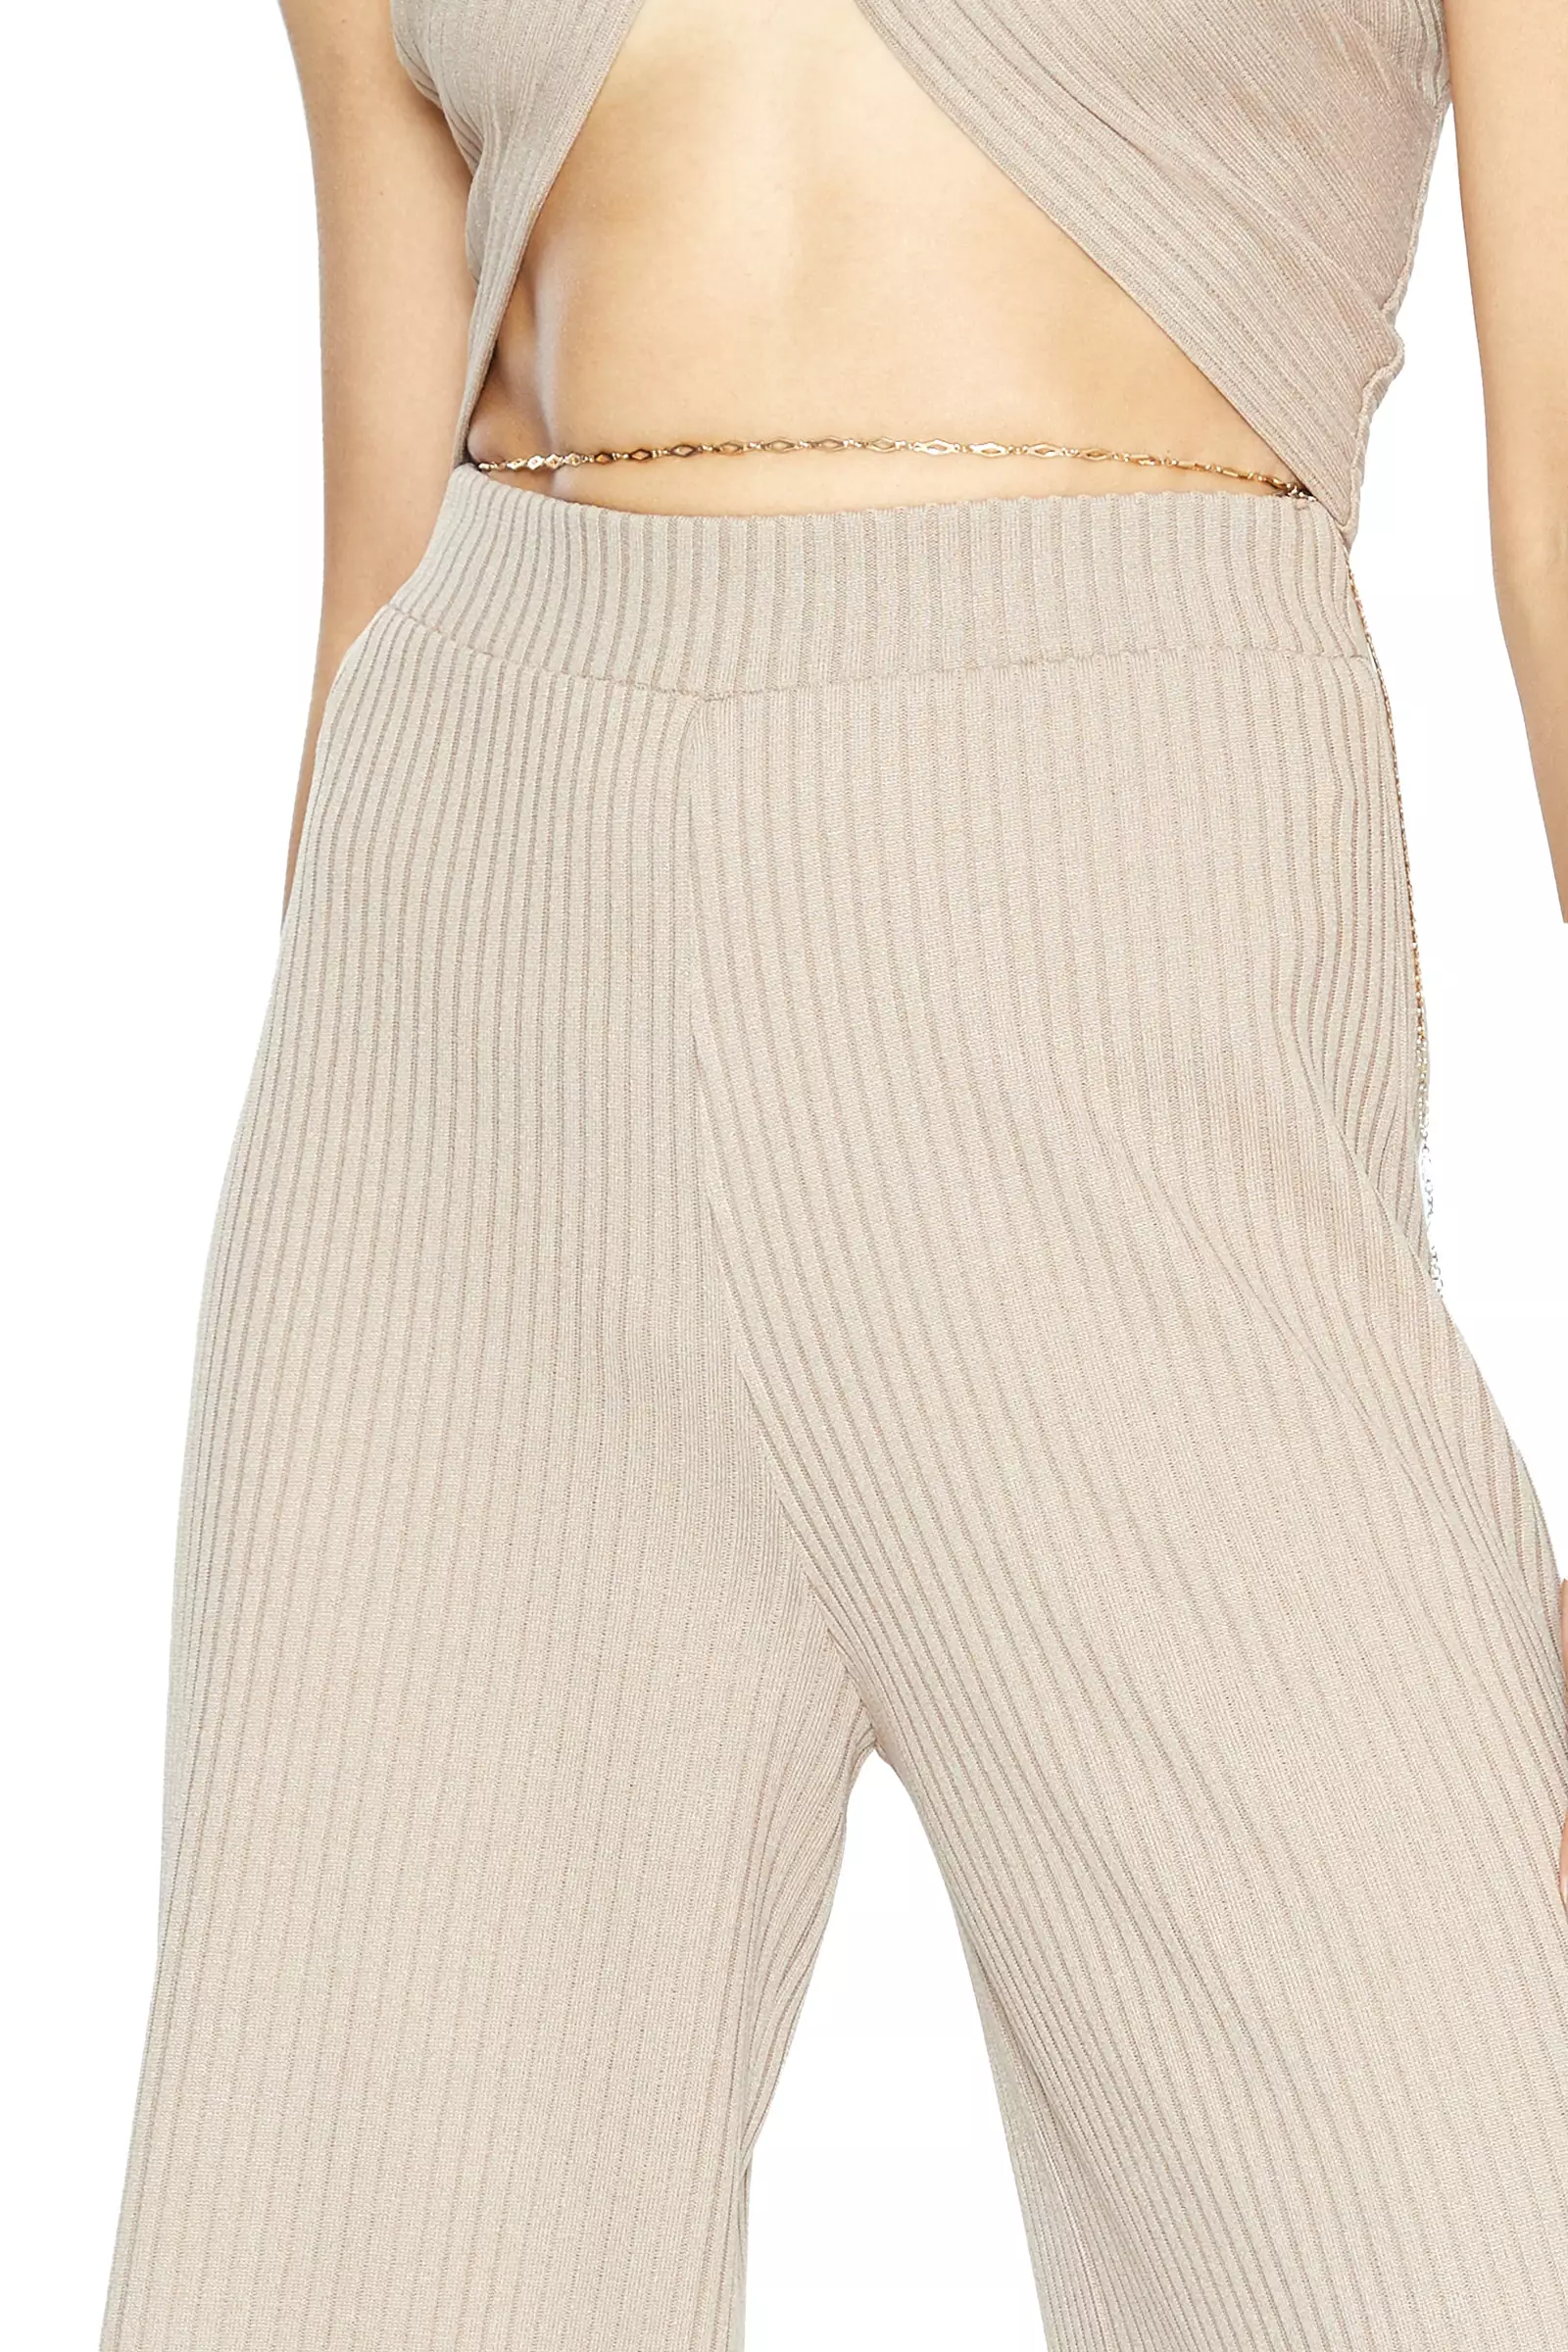 Beige knitted maxi pants